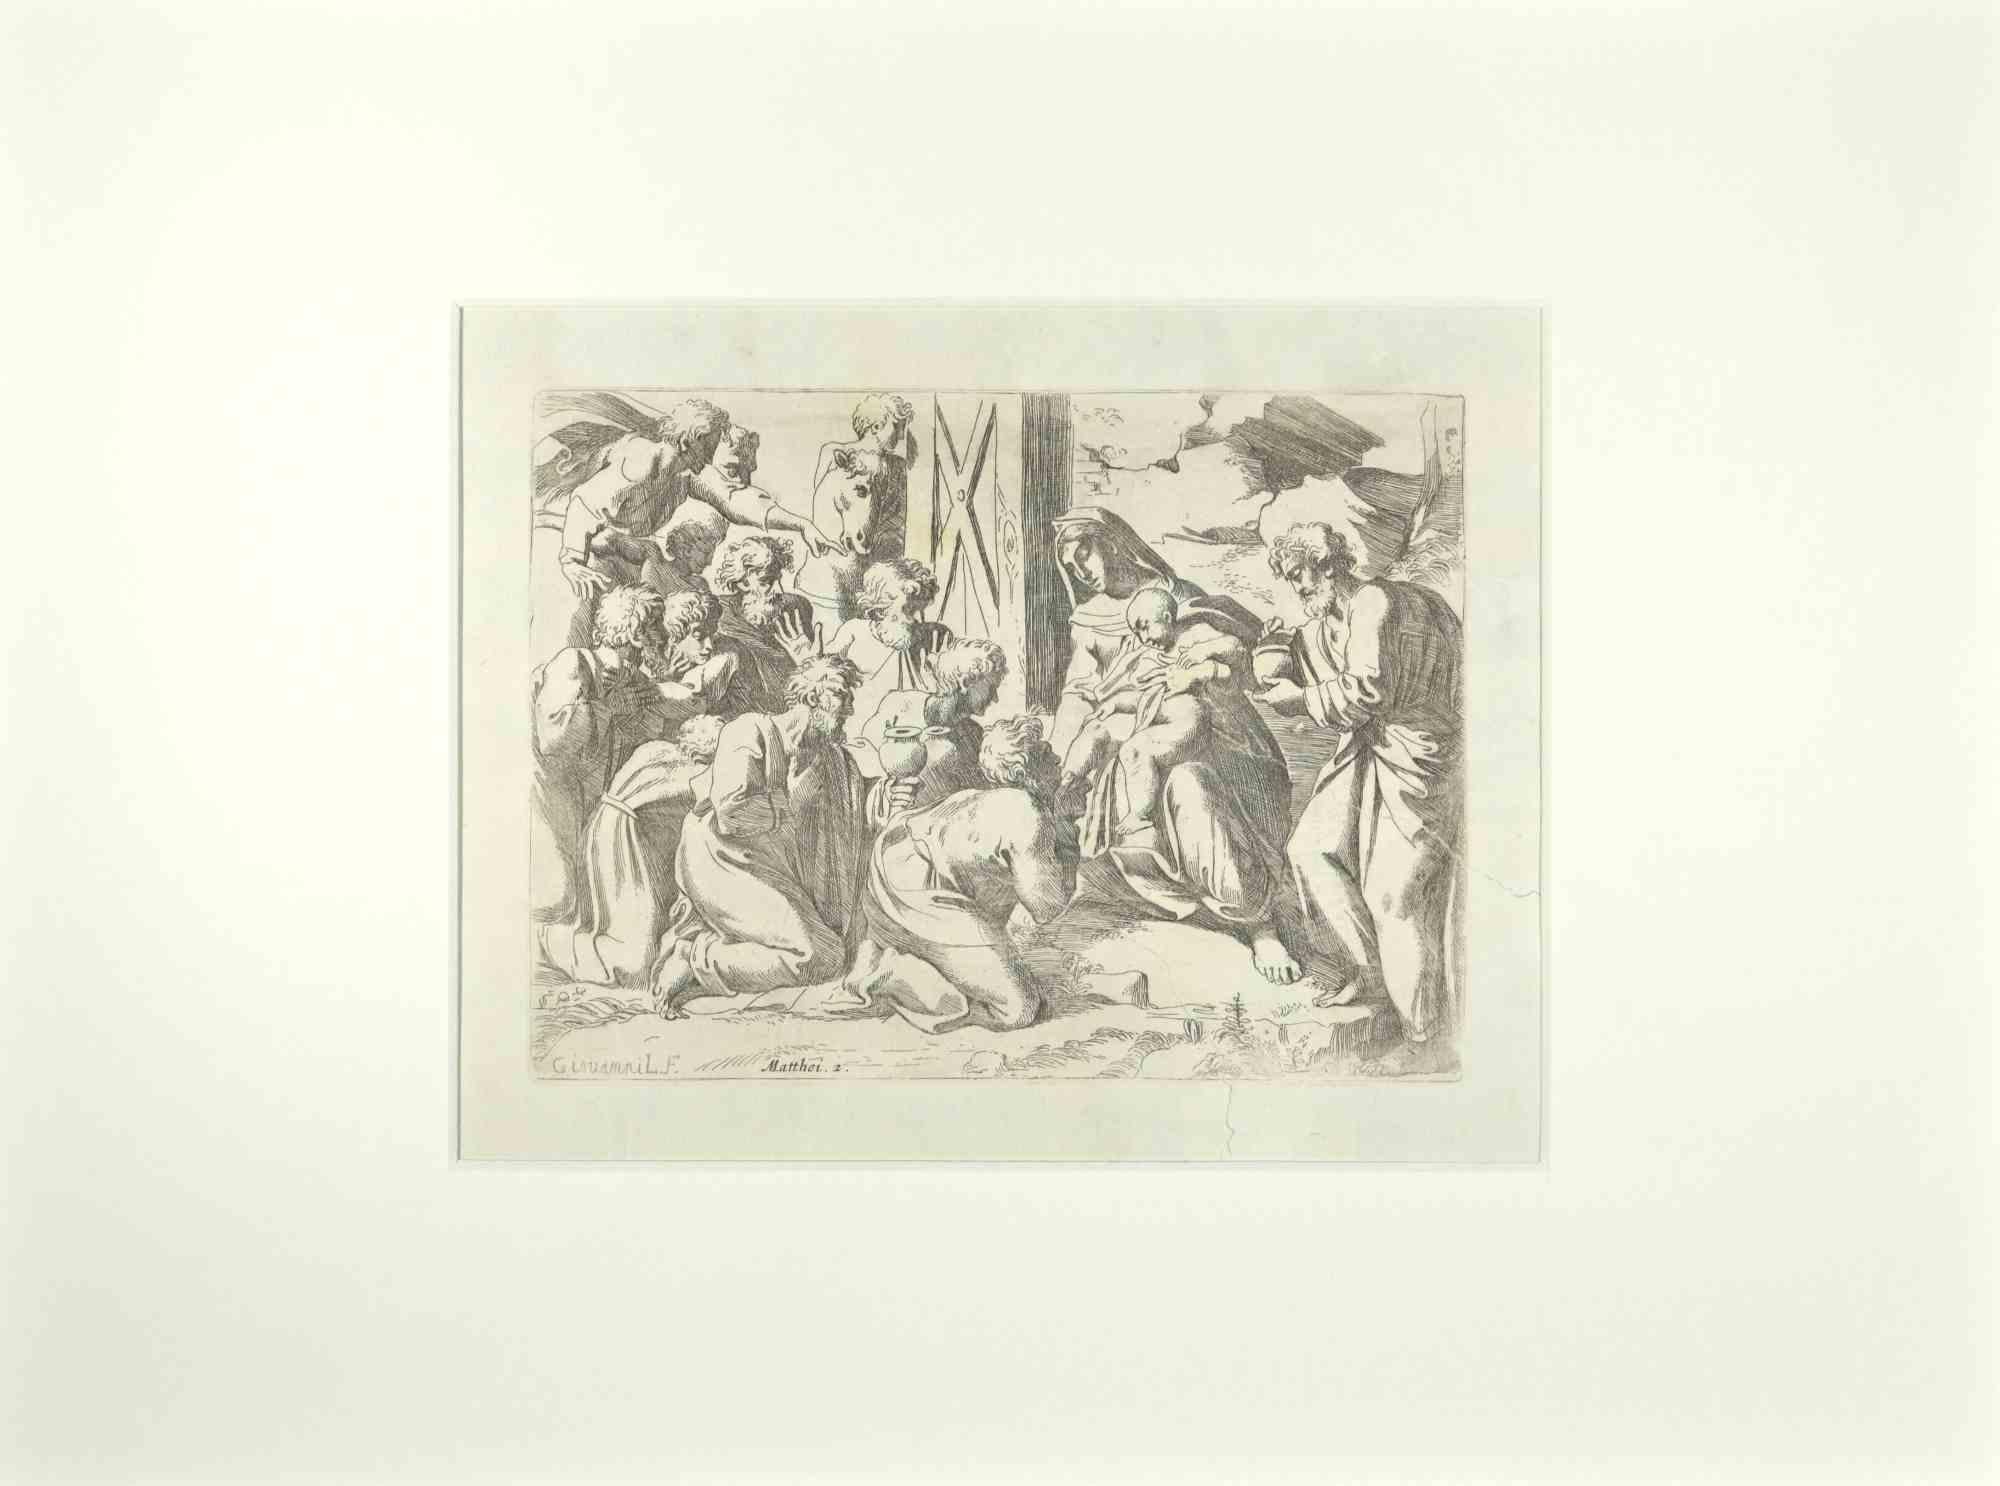 Giovanni Lanfranco (Terenzo, 1582 - Rome, 1647) Figurative Print - Matthei 2 - Old Testament Story - Etching by Giovanni Lanfranco - 1607